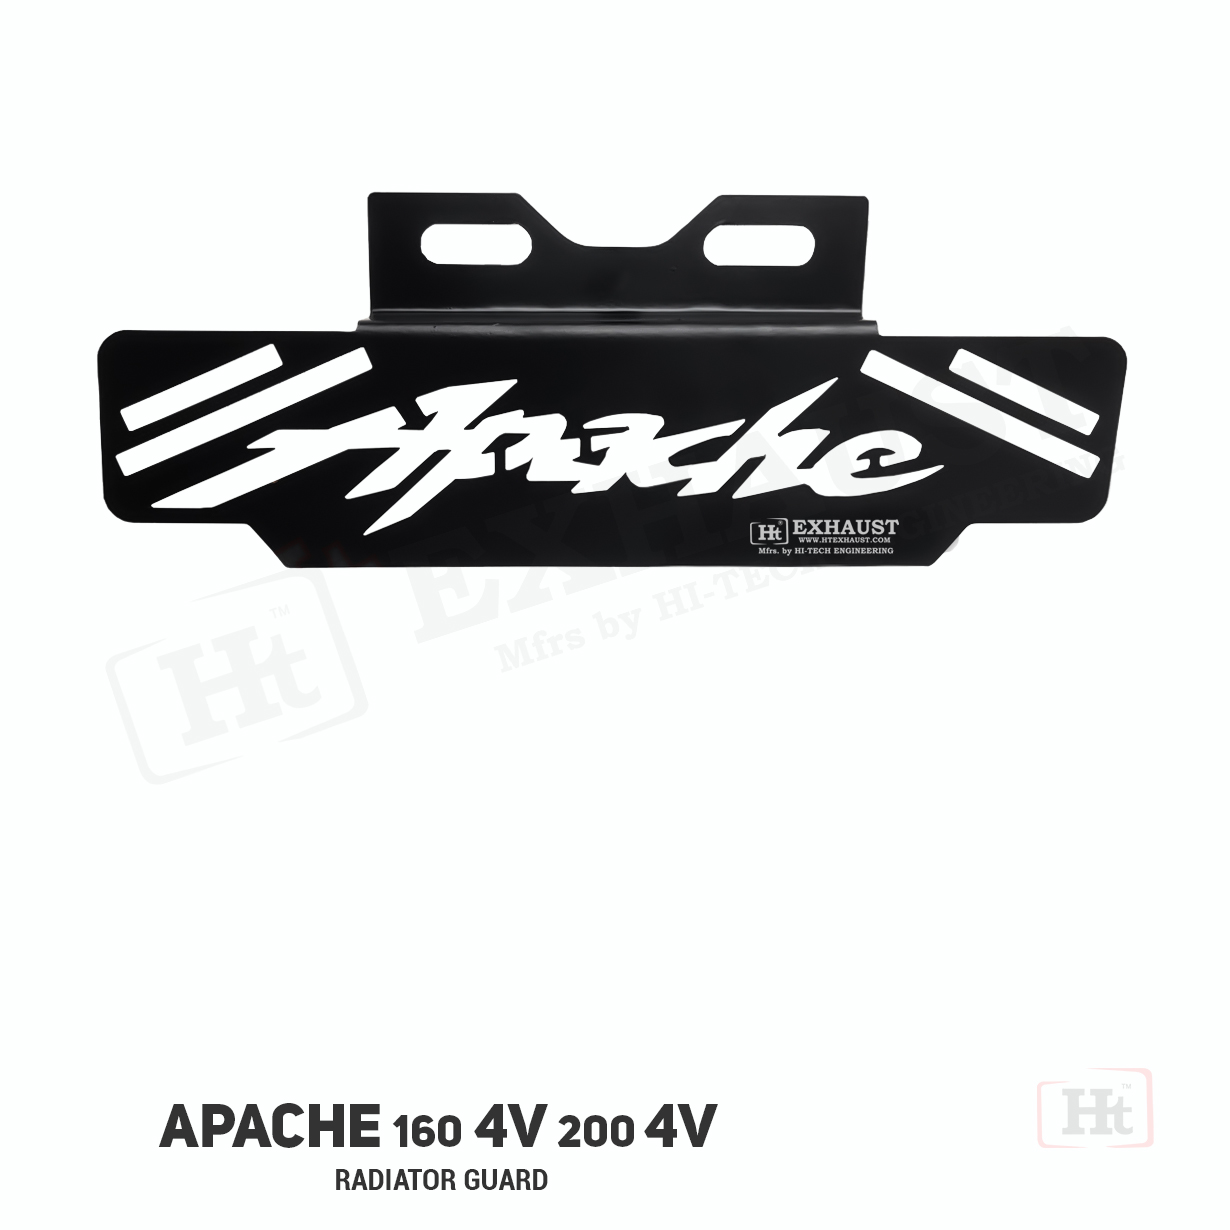 TVS apache logo stickers in custom colors and sizes